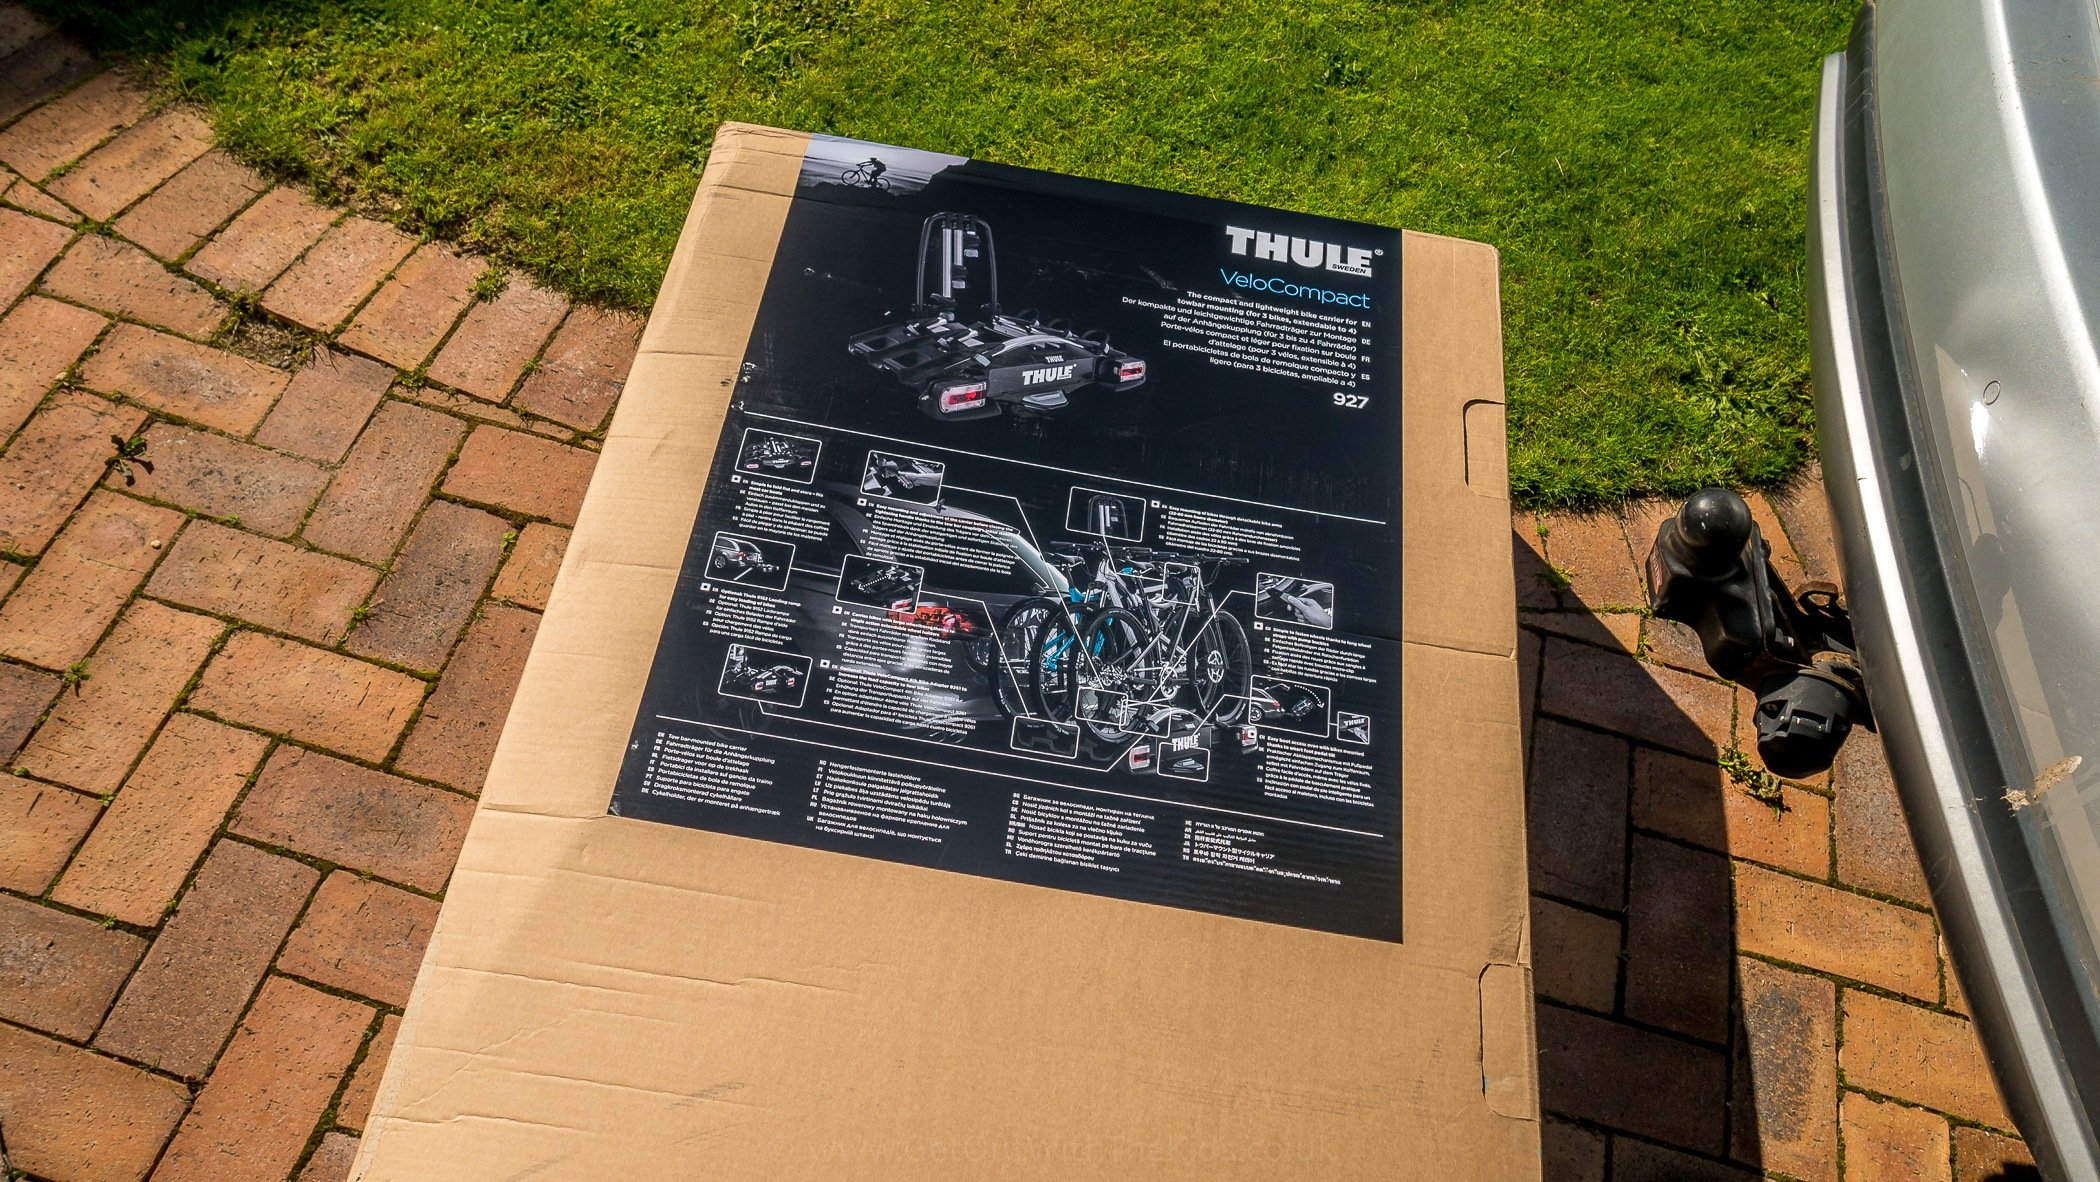 The Thule Cycle Carrier in its box